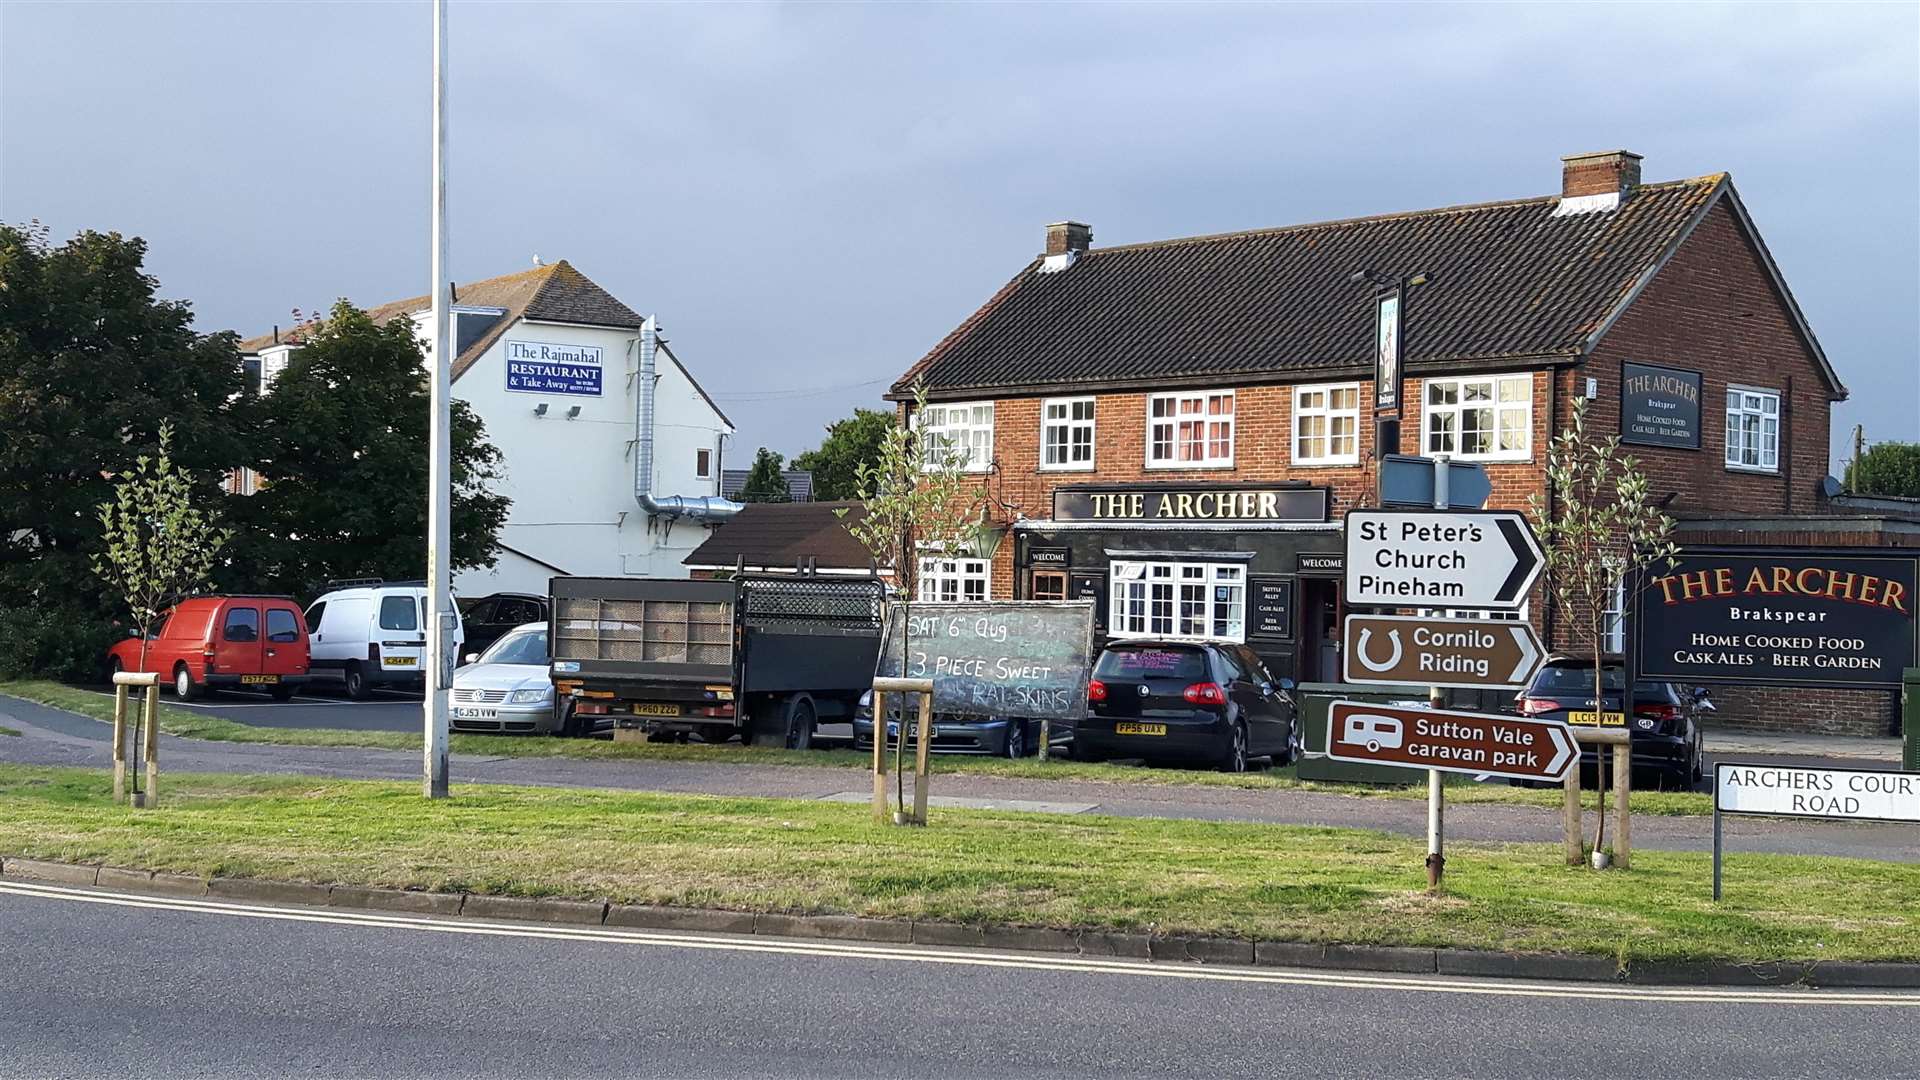 The Archer pub near the A2 roundabout, one of the landmarks of Whitfield